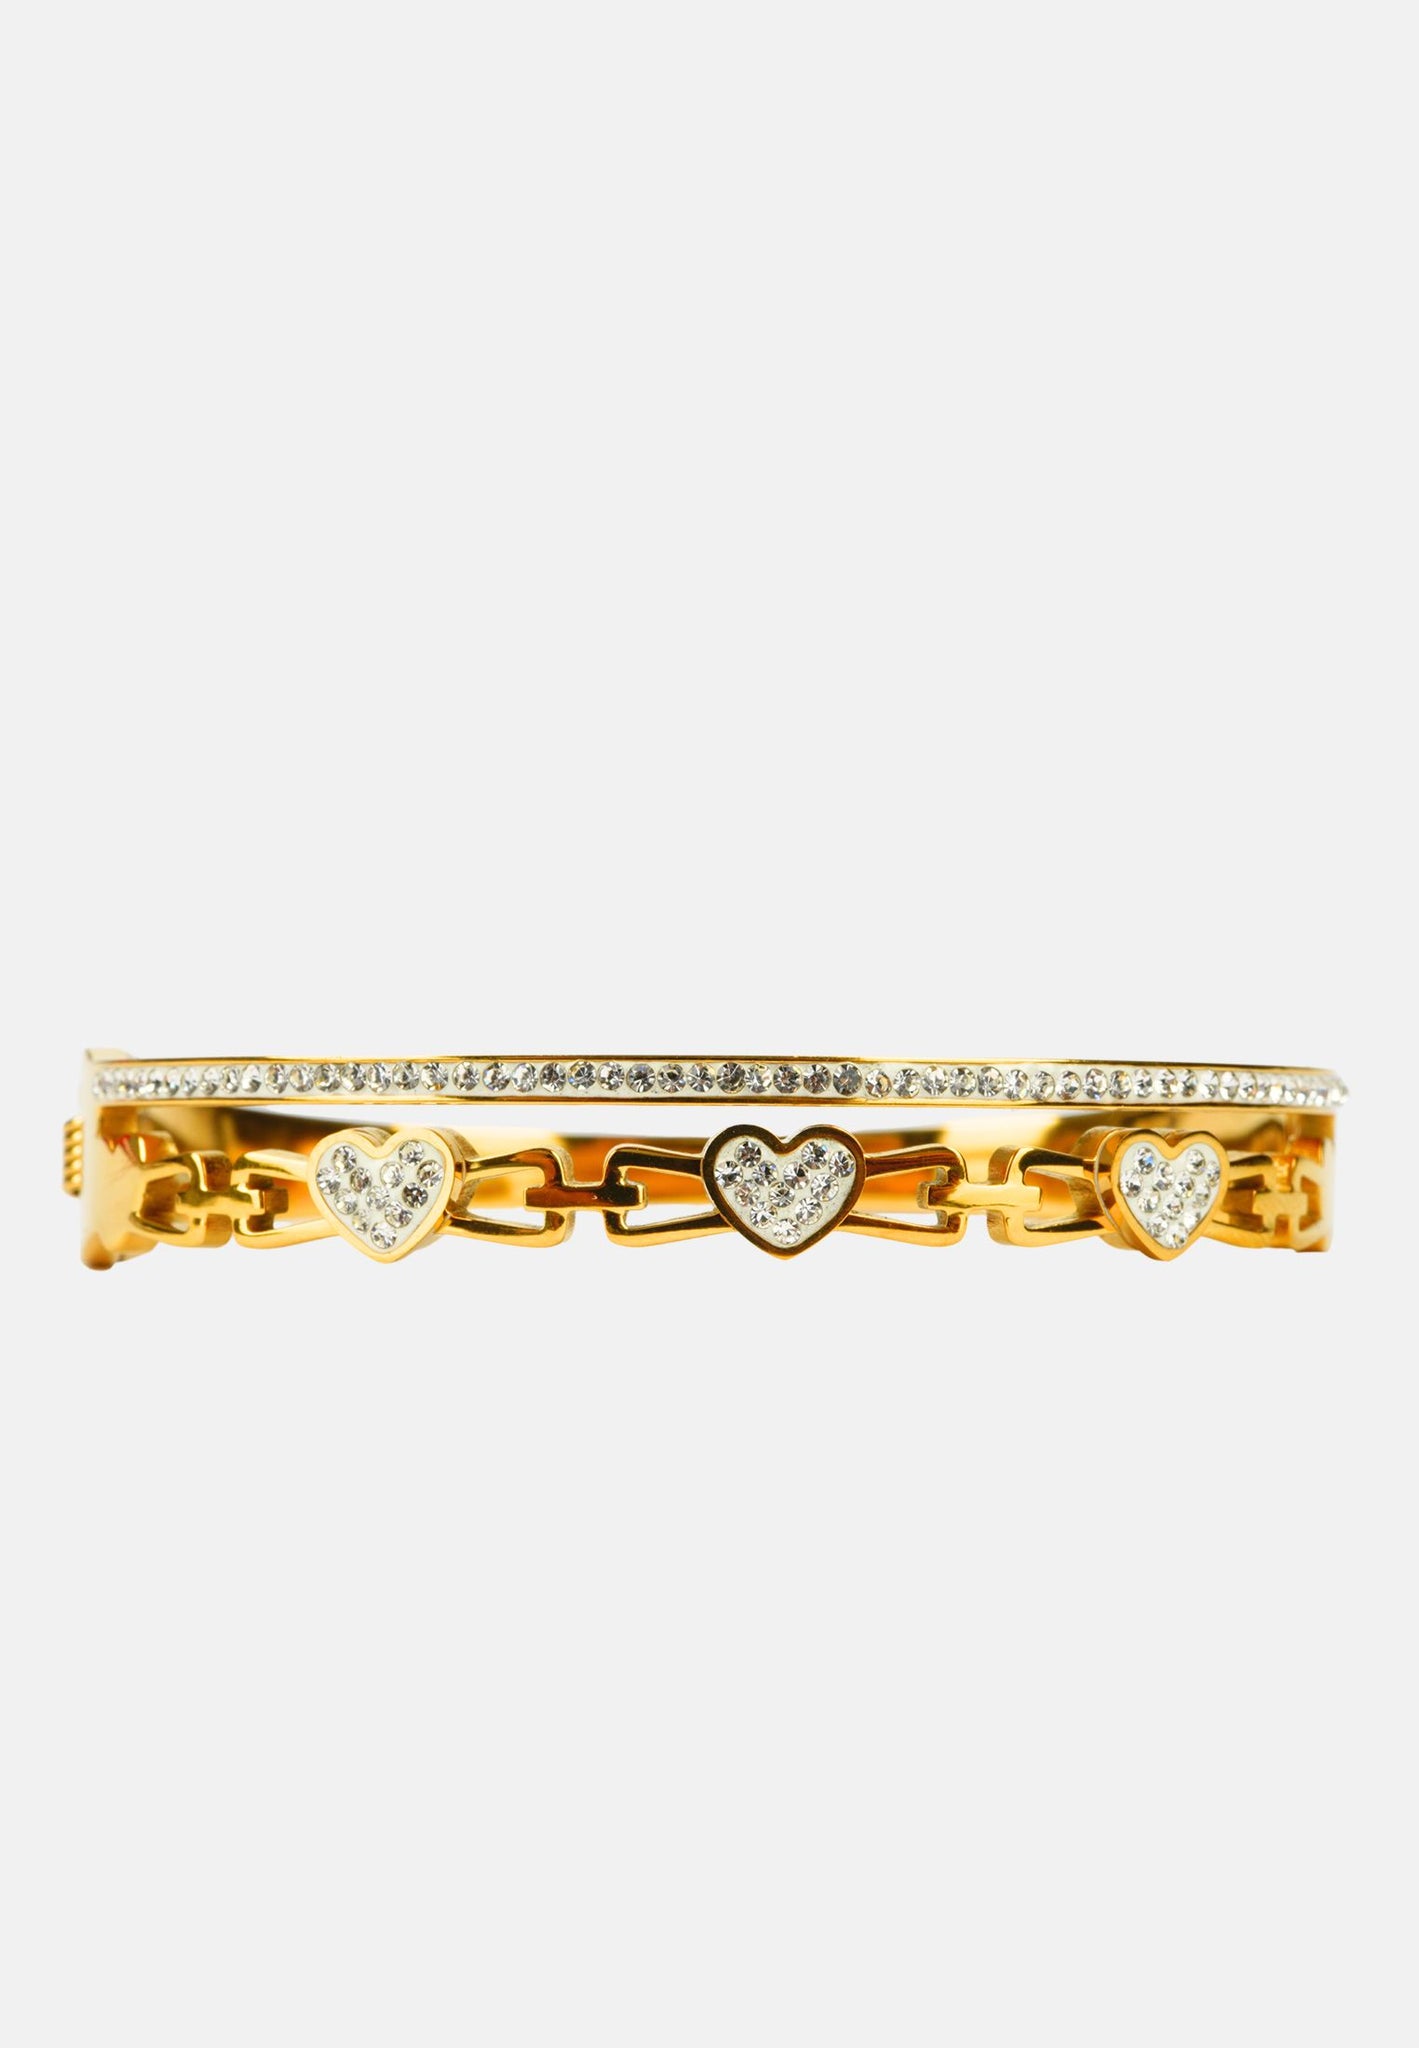 Rigid bracelet with hearts and glitter